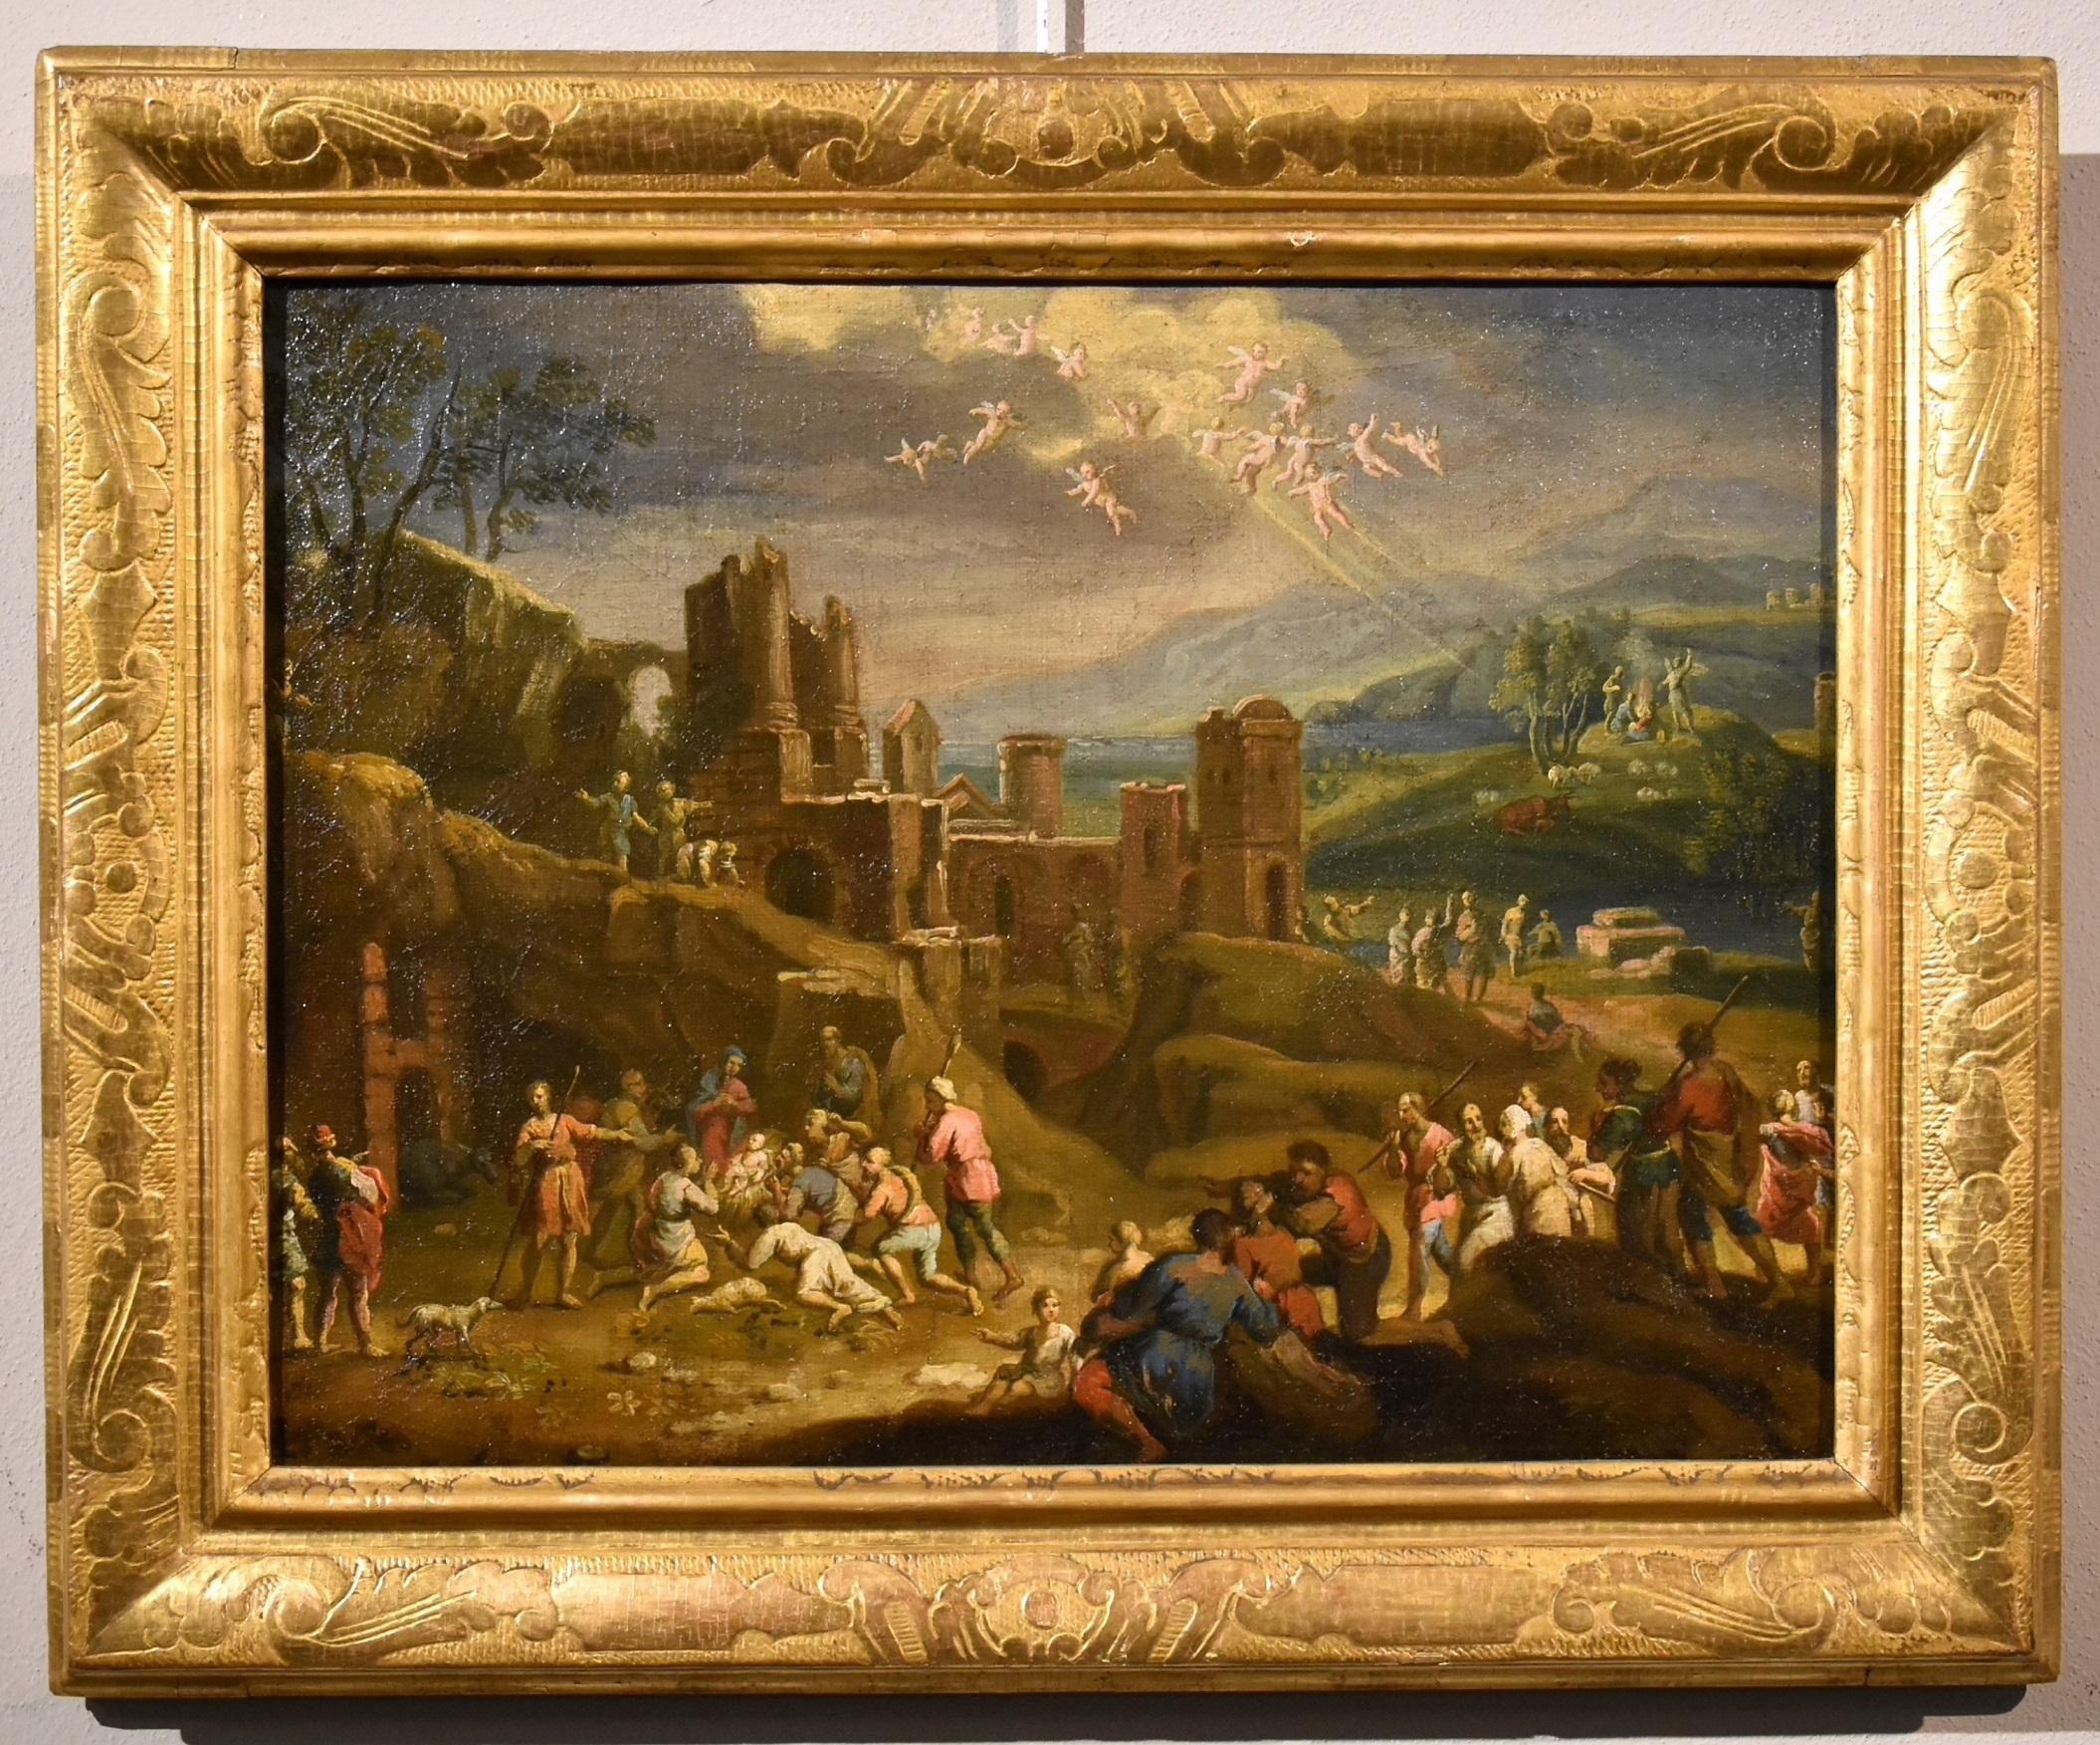 Landscape Nativity Religious Paint Oil on canvas Old master 17th Century Italian For Sale at 1stDibs